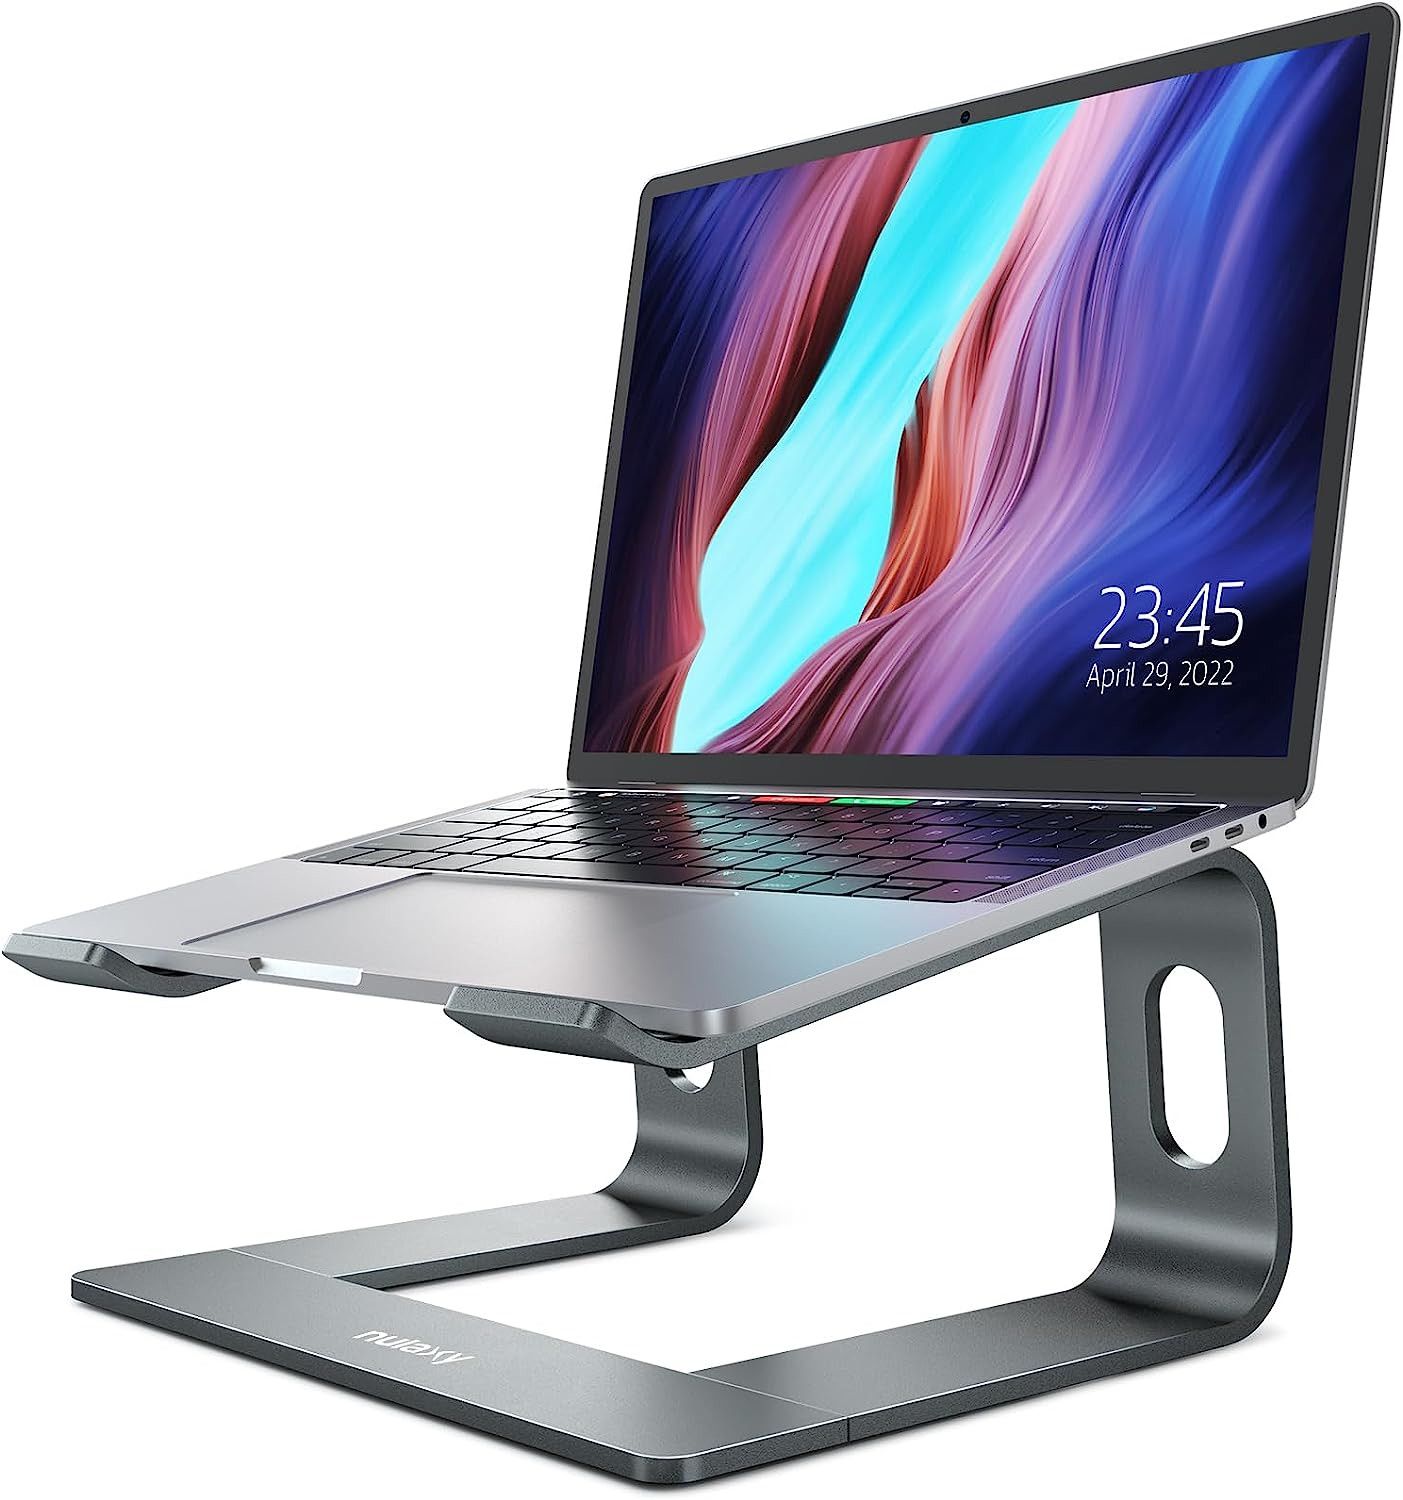 Nulaxy Laptop Stand product photo